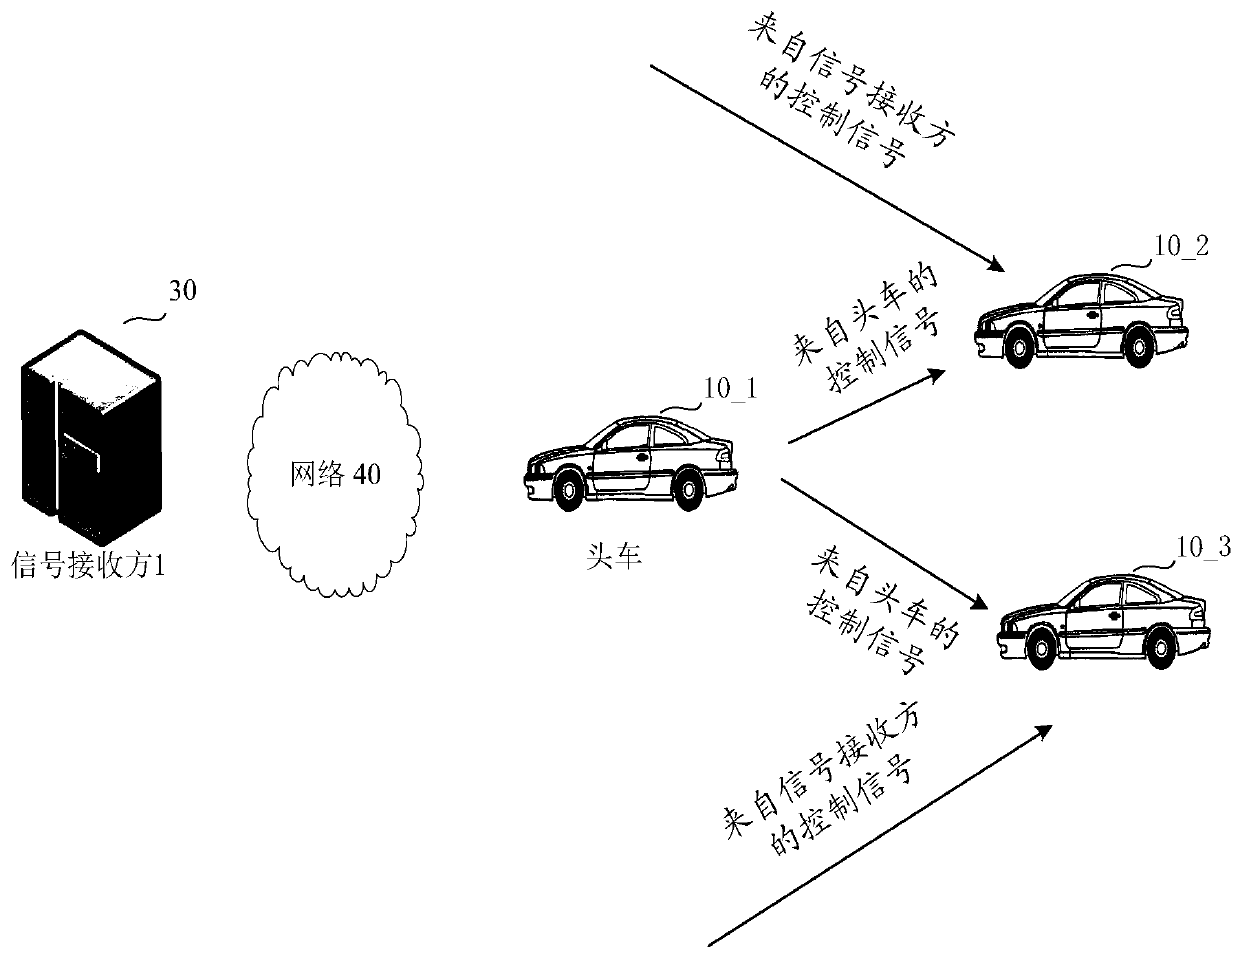 Automatic driving control method and related device